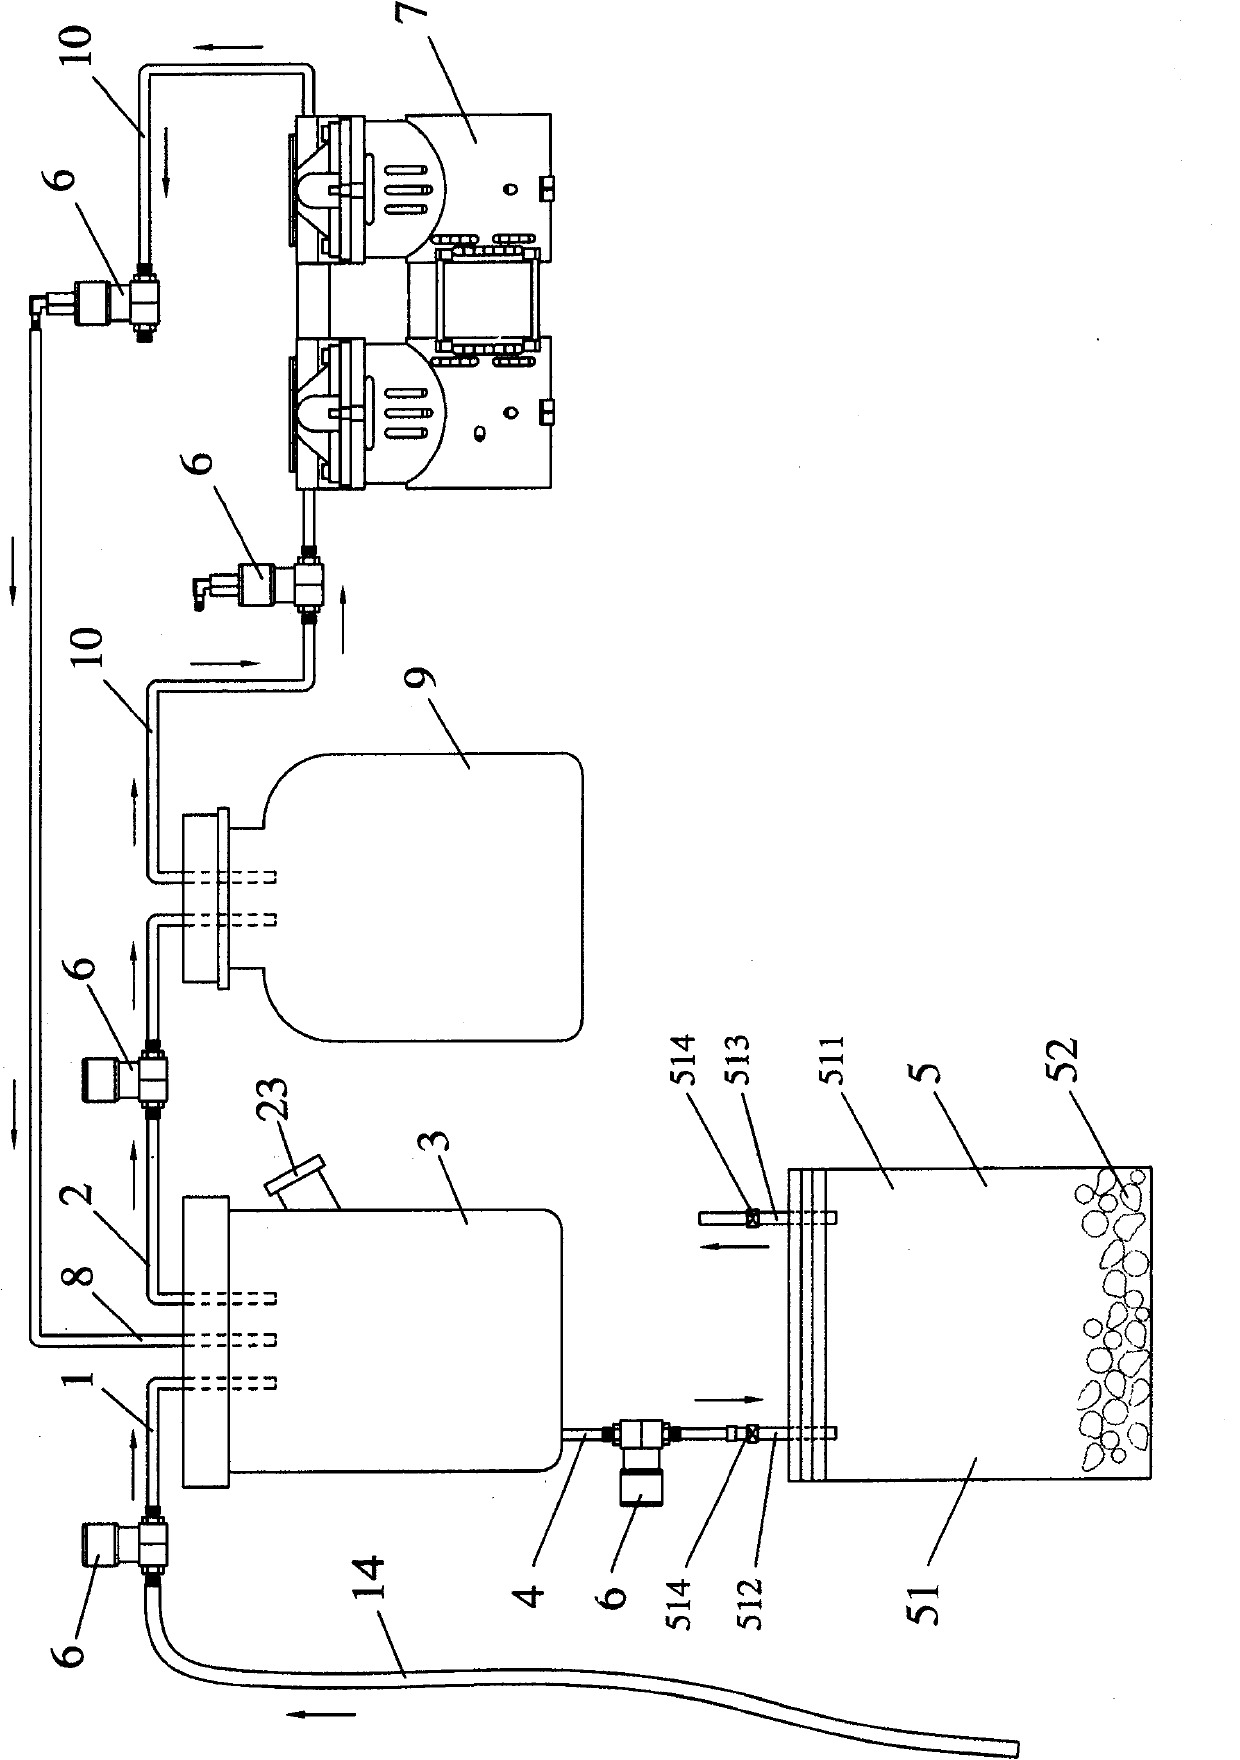 Automatic apparatus for collecting and treating medical sewage